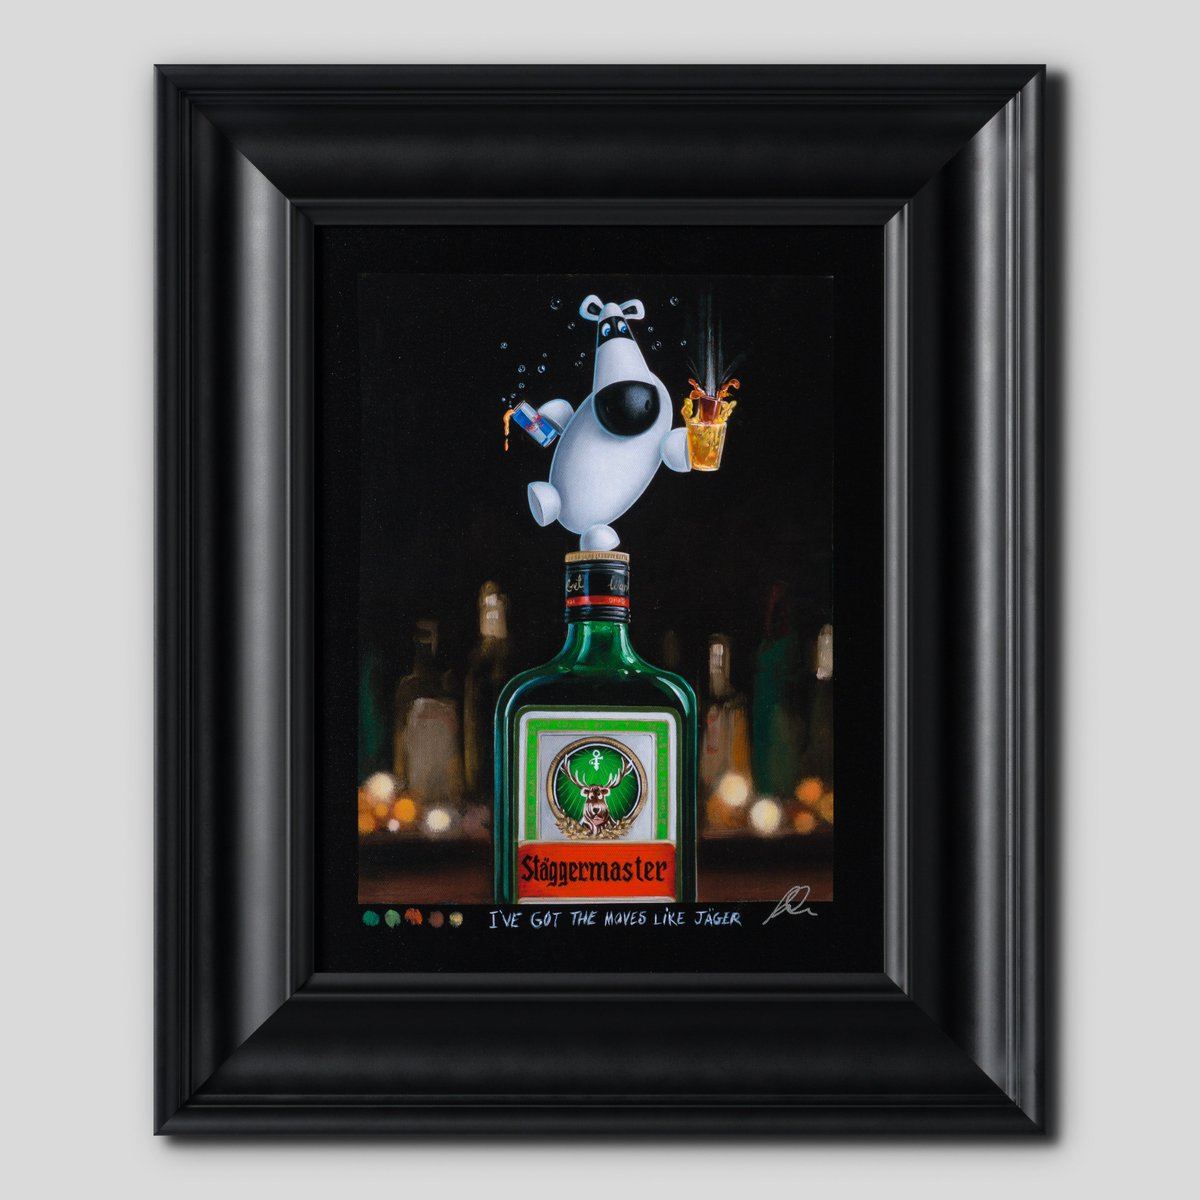 So, whether you’re a ‘Saturday Night Believer’ or a ‘Wanqueray on Tanqueray’, there’s a piece from this intoxicating collection for you.  Curate your collection now online and in galleries. bit.ly/SIP_CFA

@Impossimal